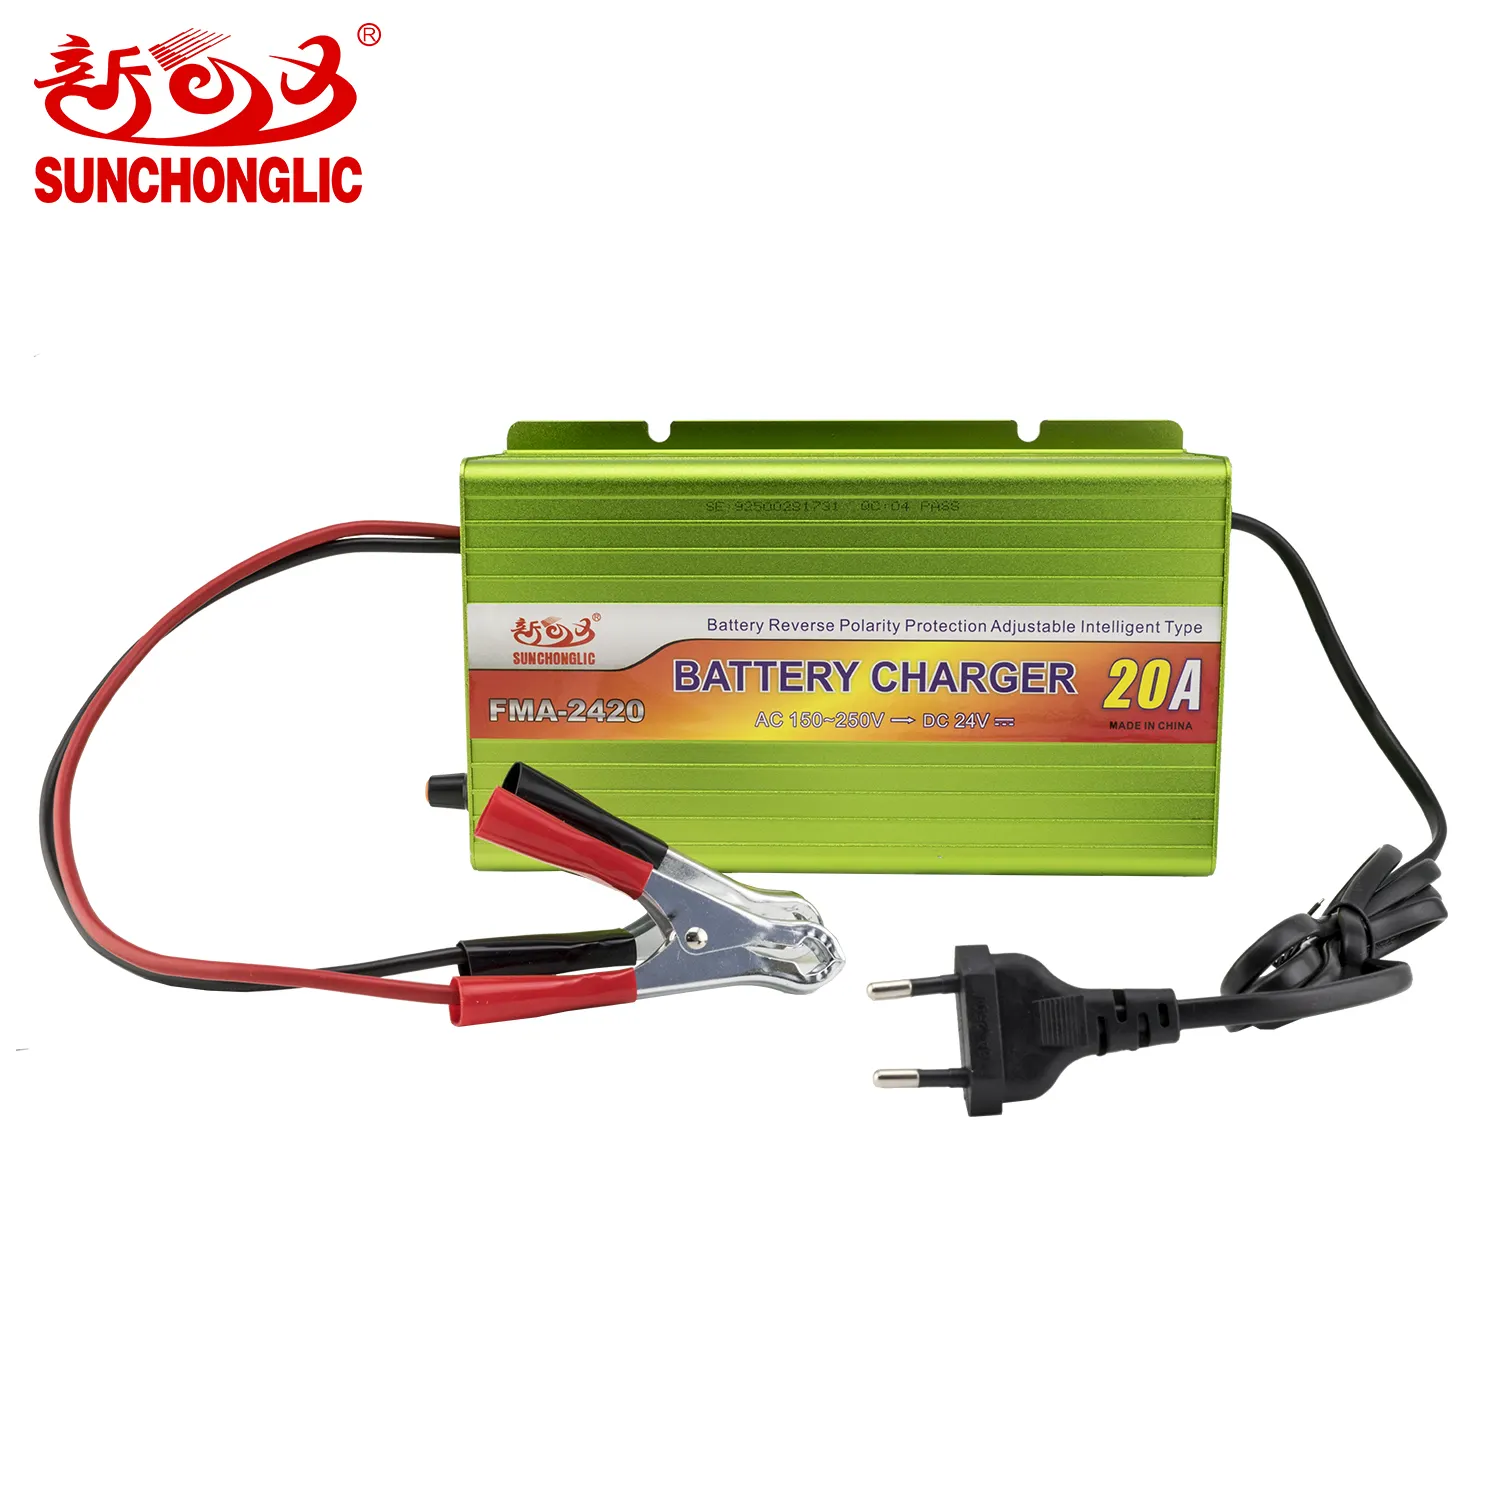 Sunchonglic 24 volt battery charger 24V 20A 20 amp three-phase car lead acid battery charger